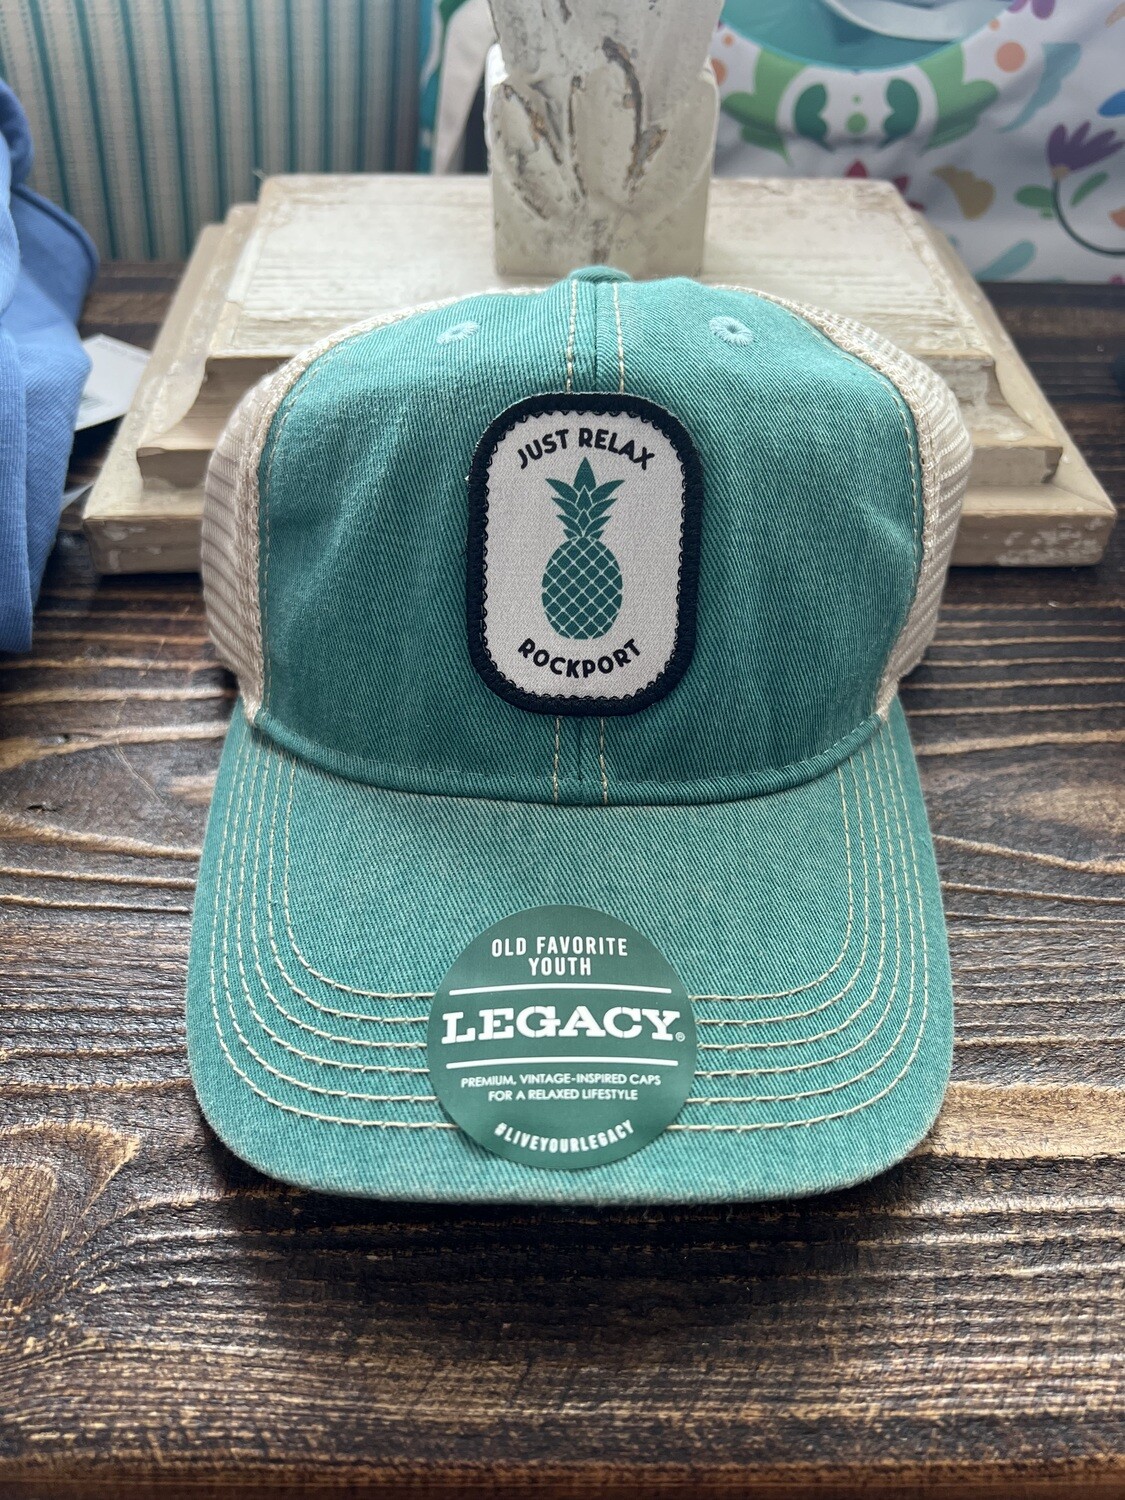 Legacy Youth Old Fashioned "Just Relax" Trucker